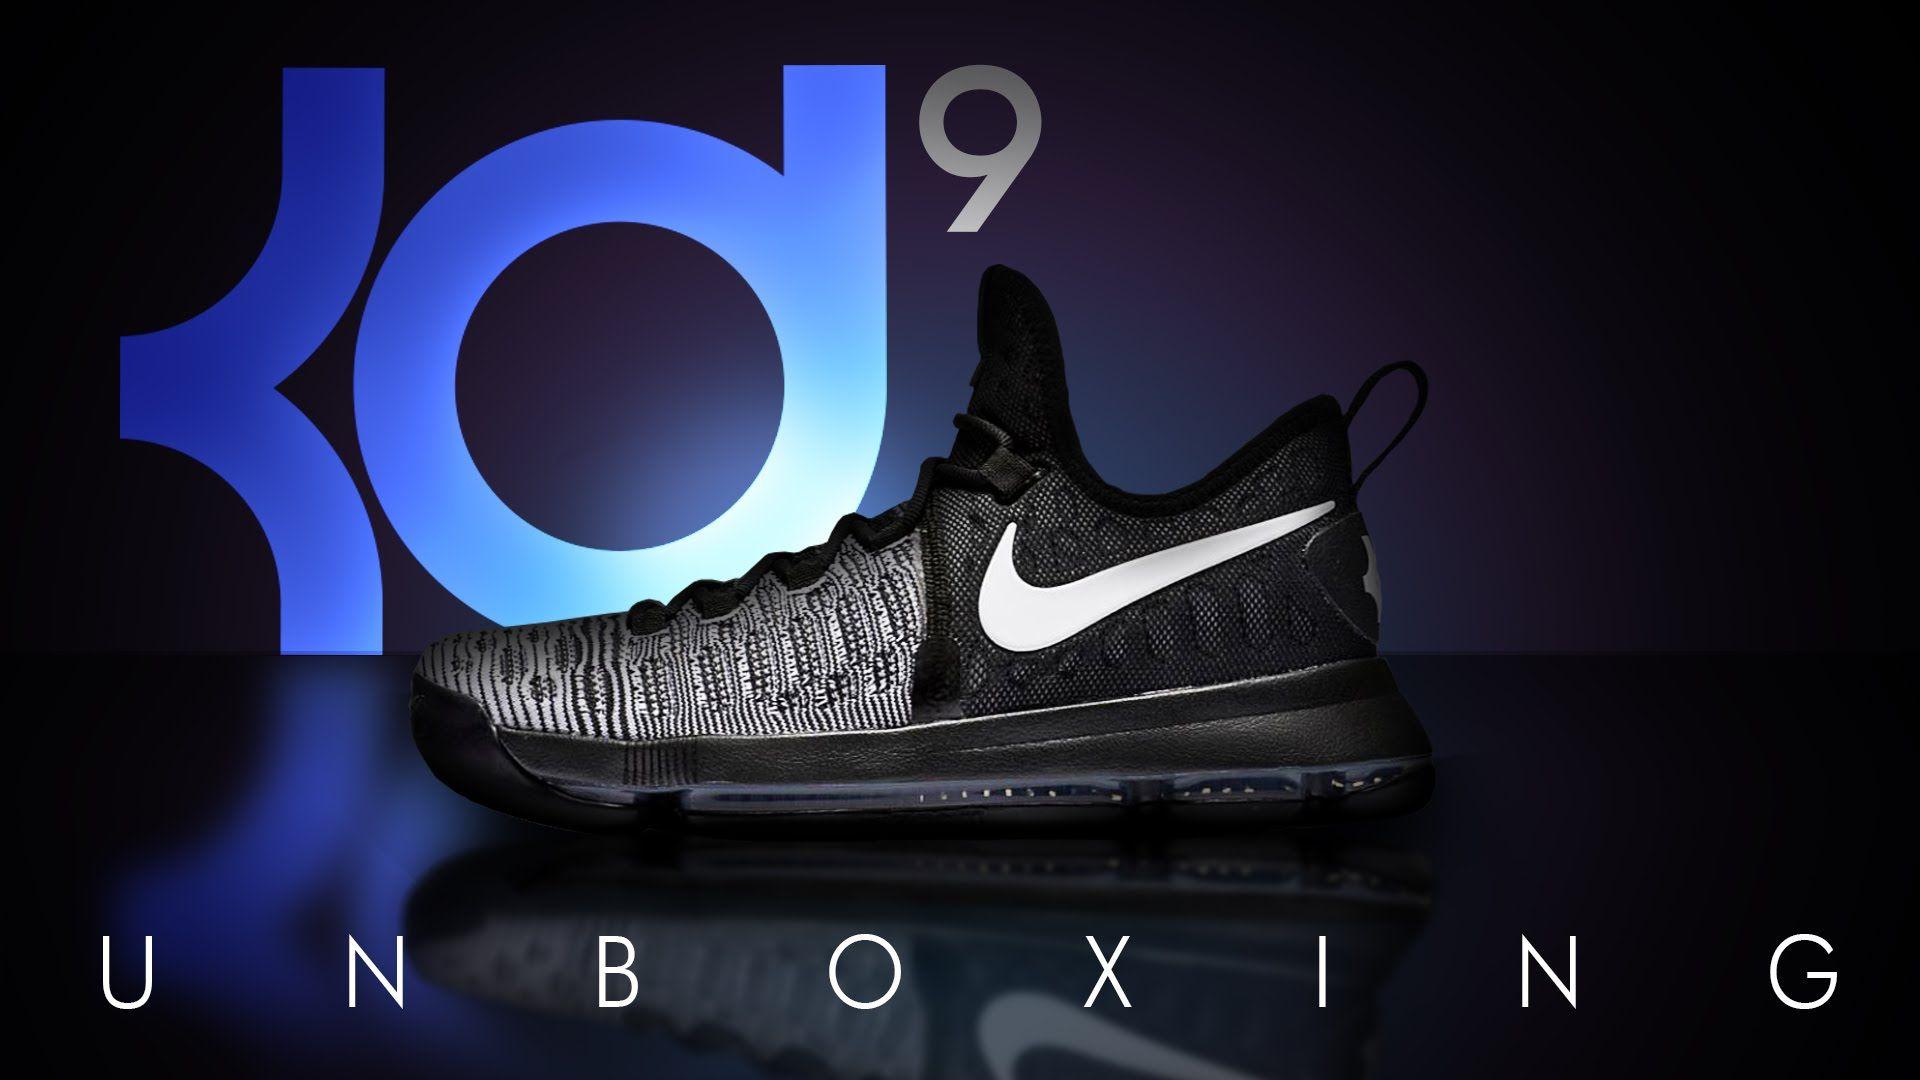 NIKE KD 9 UNBOXING MIC DROP (BLACK AND WHITE / OREOS) ON FEET (Video